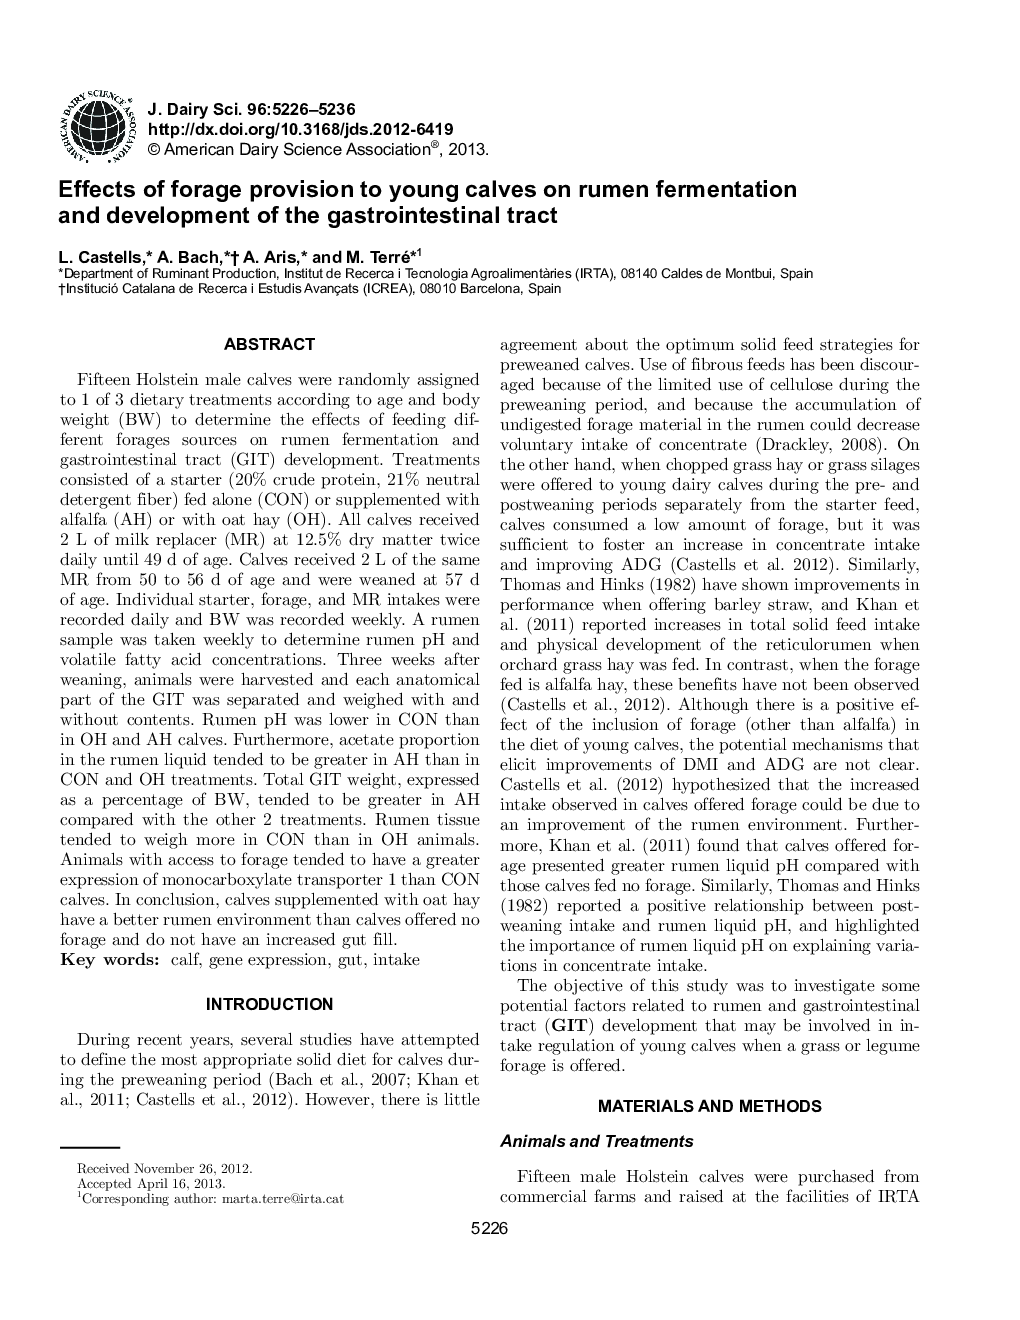 Effects of forage provision to young calves on rumen fermentation and development of the gastrointestinal tract